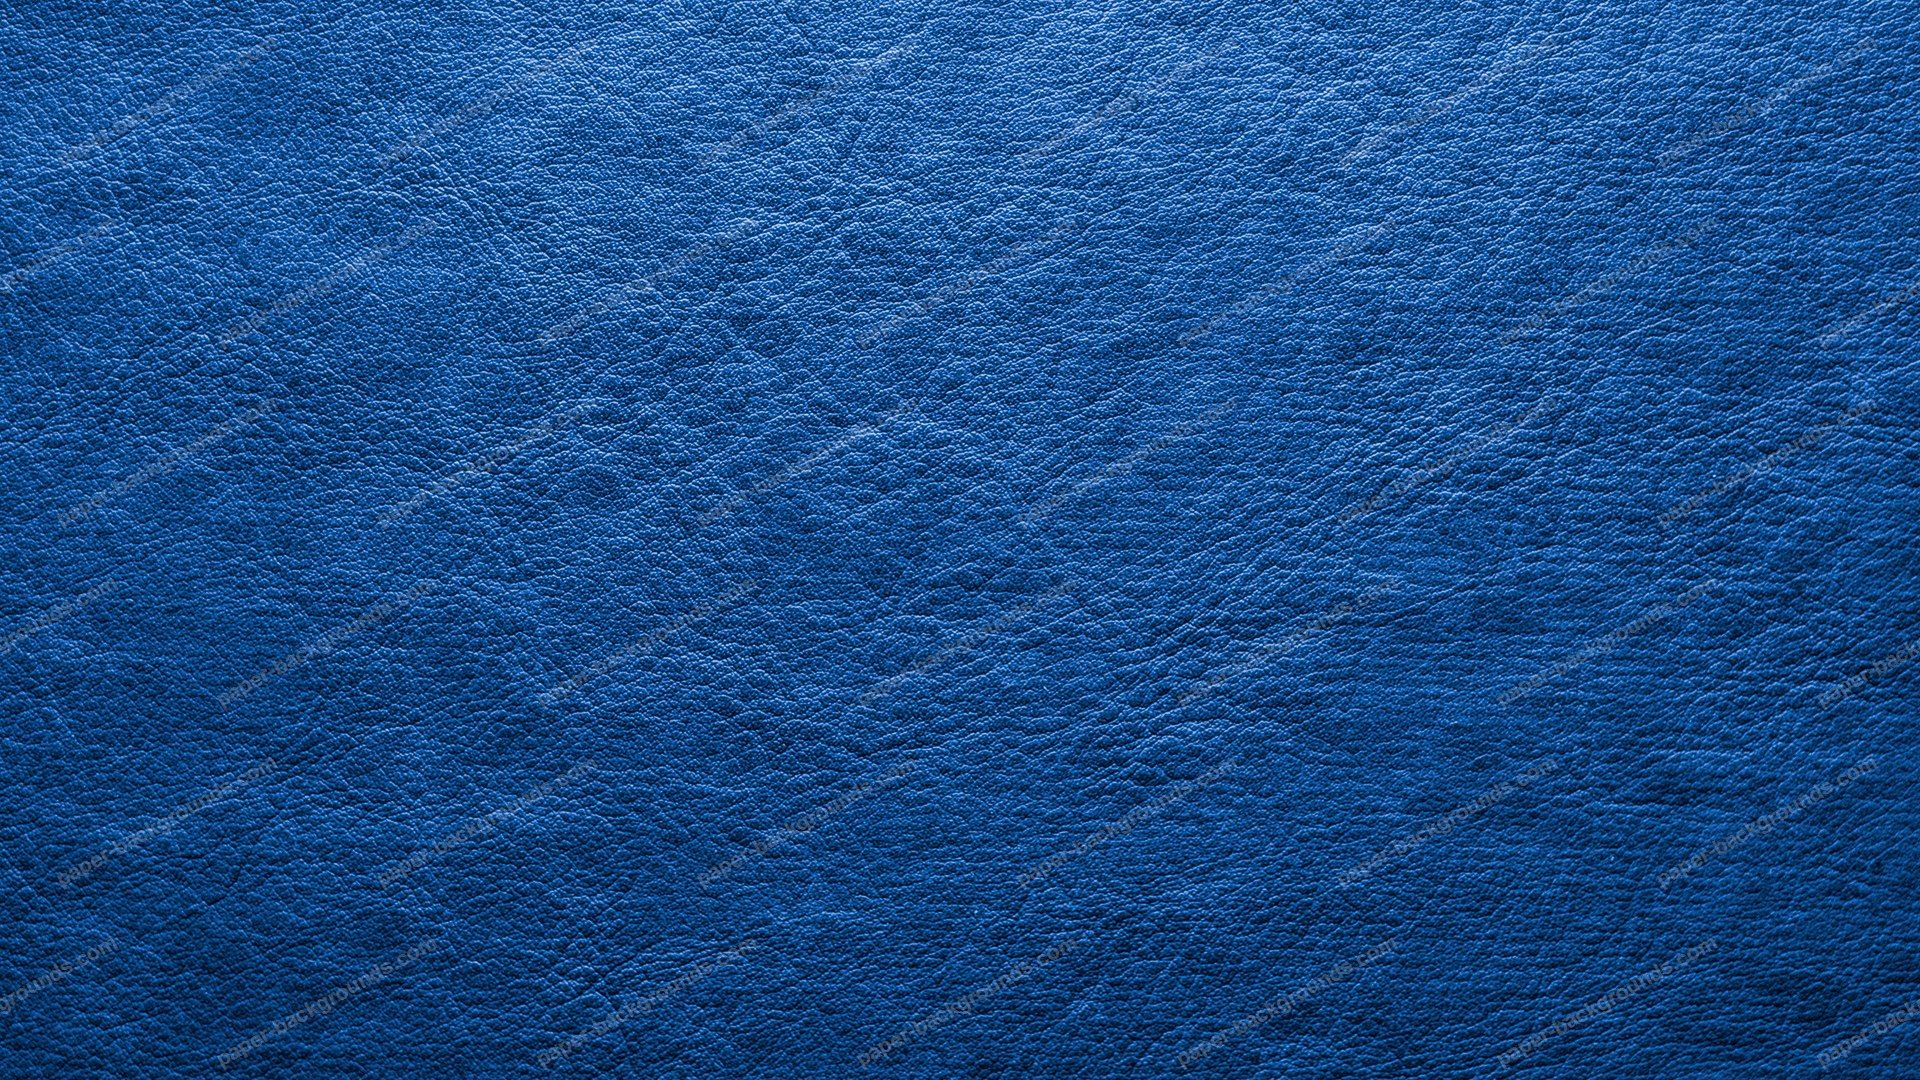 Related image. Blue abstract, Beautiful wallpaper, Abstract